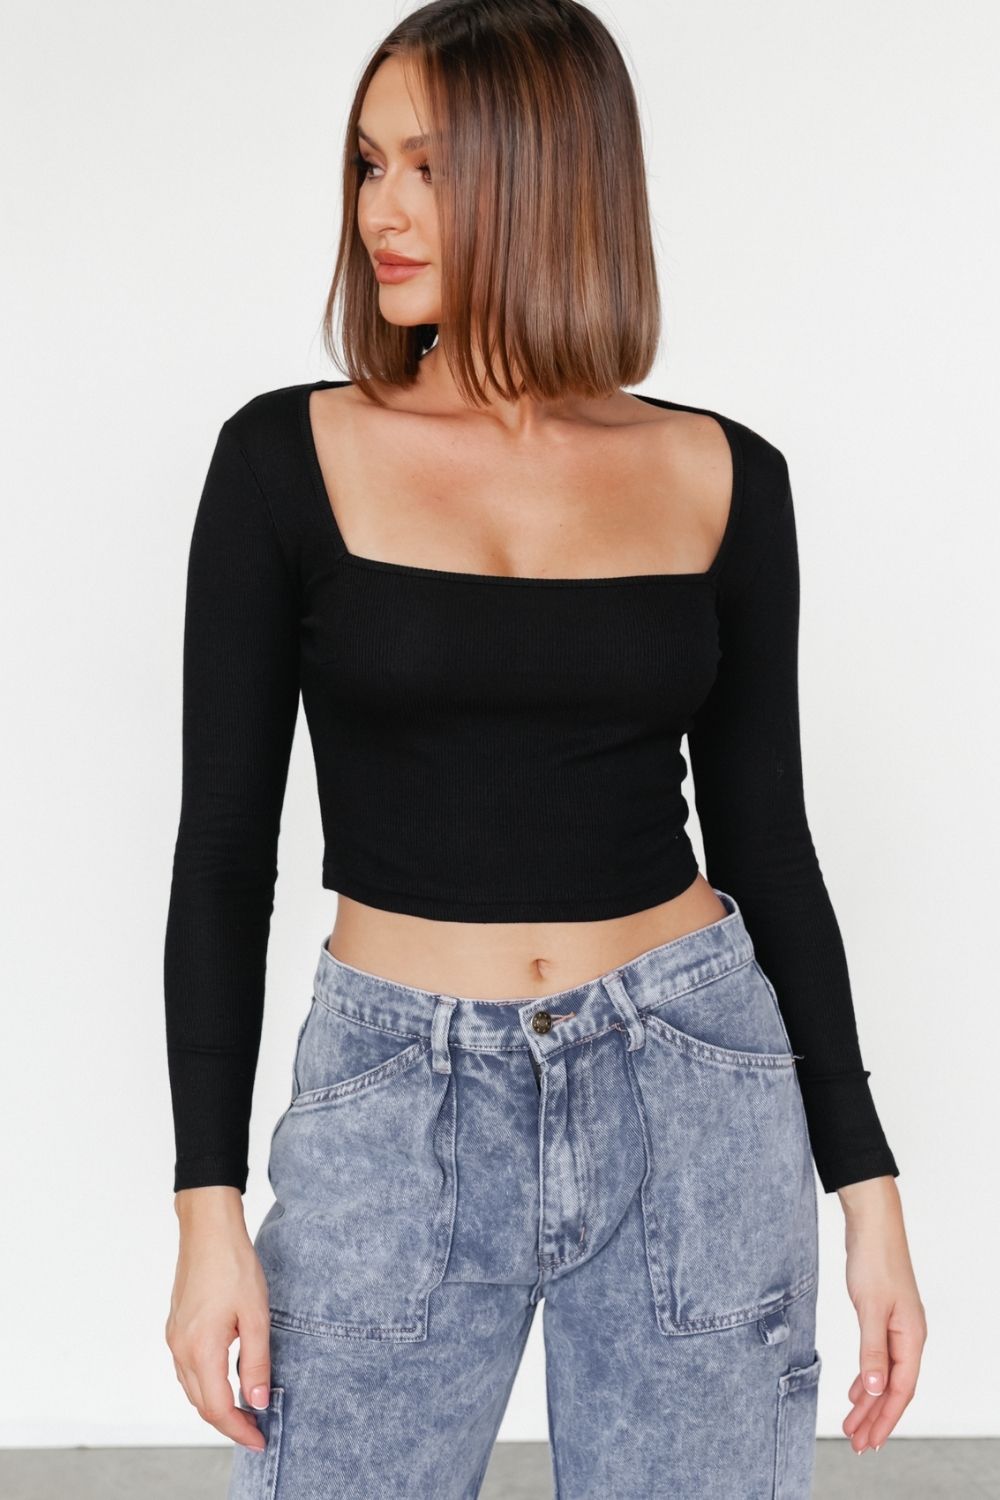 Black Crop Top With Square Neckline – Styched Fashion